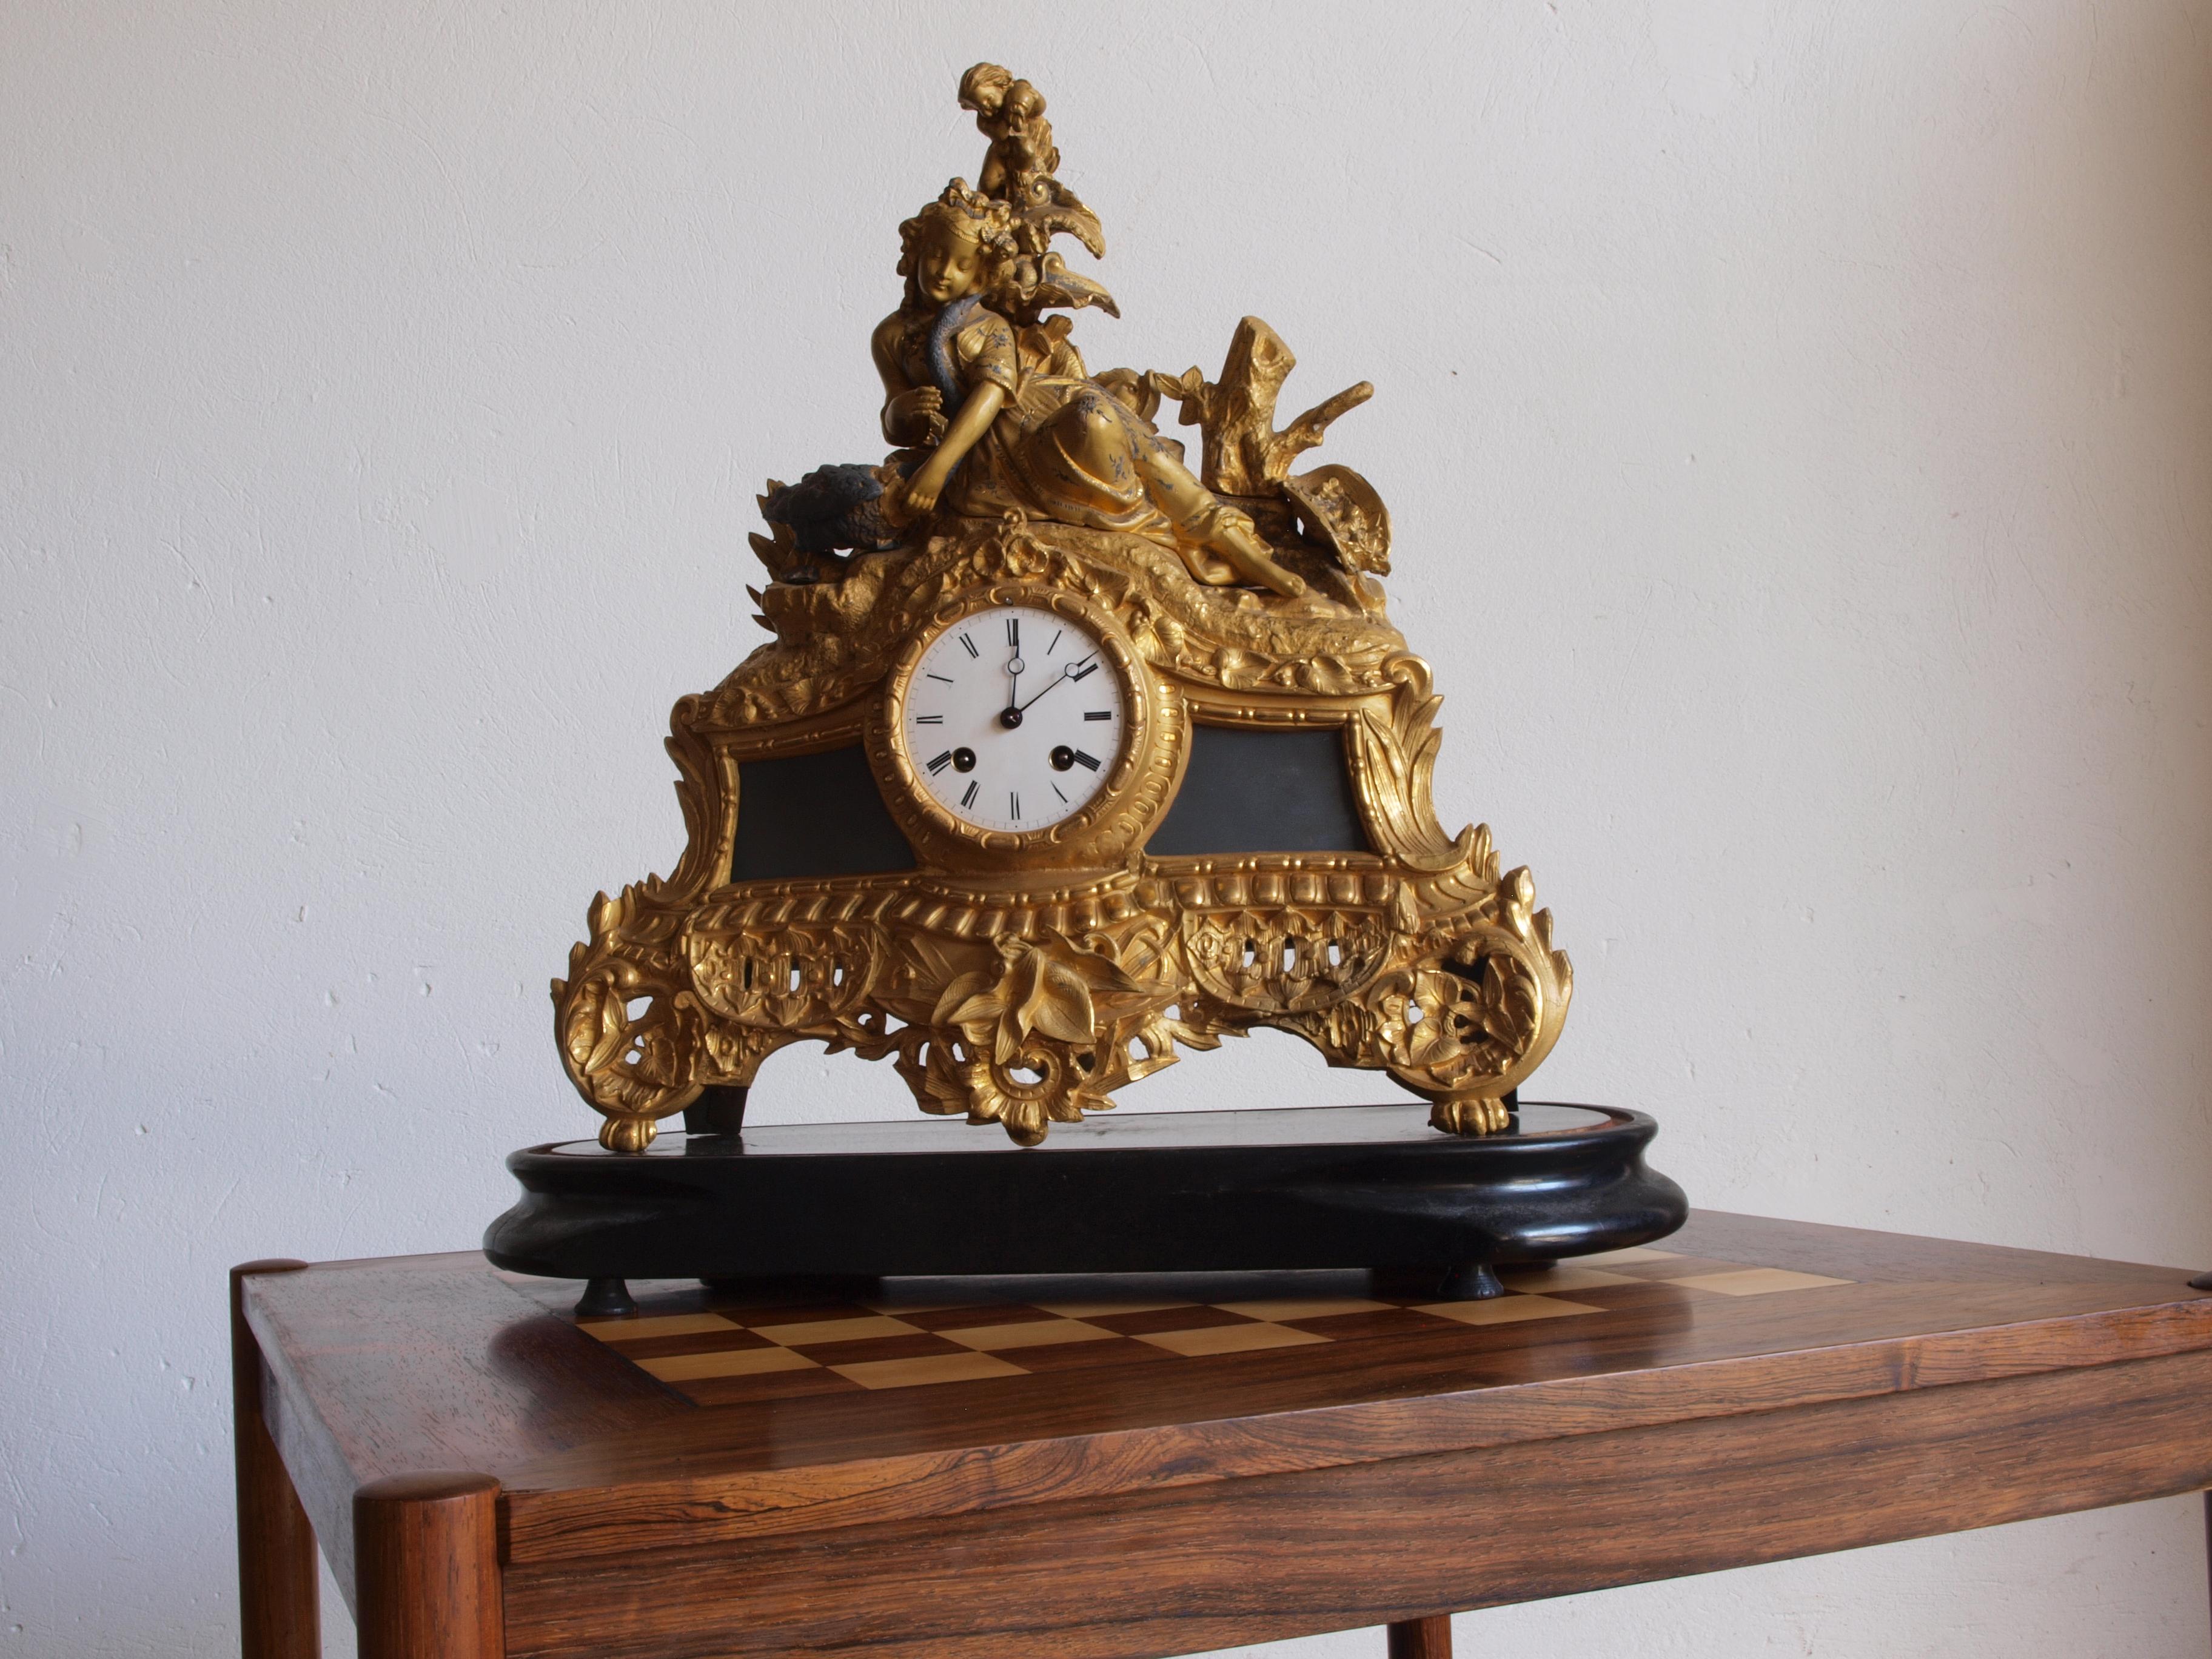 This is a large late 19th-century gilt spelter mantle clock produced by Phillipe H. Mourey (1840-1910) in France. It features a female sculpture with a swan on top. The clock comes with a key, and the dome is intact, though the clock's functionality